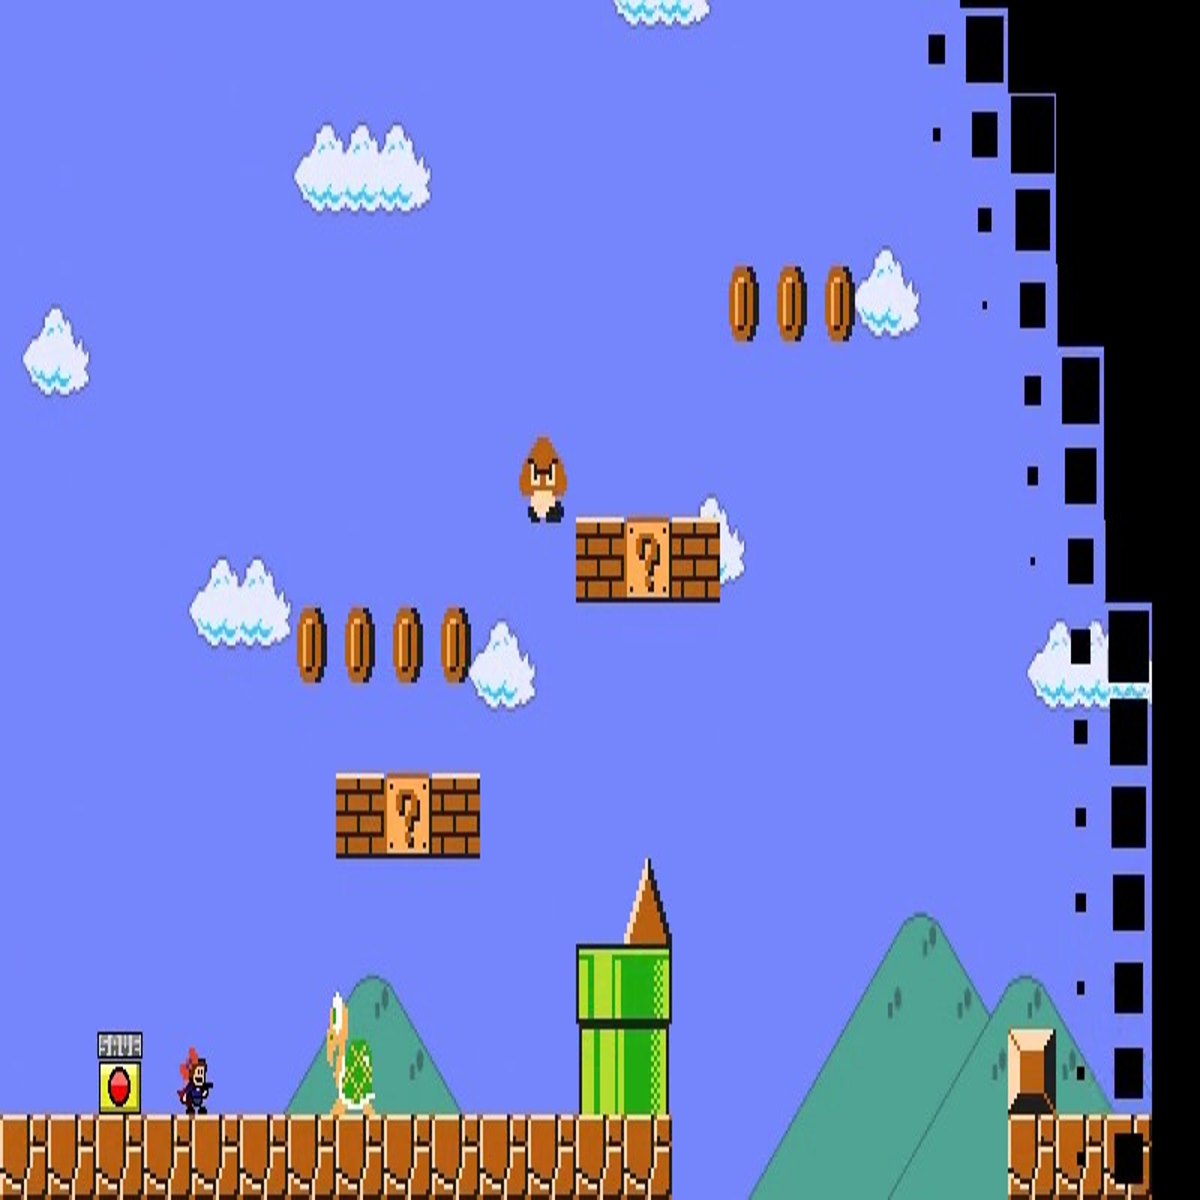 Even Super Mario Bros. Wonder's approach to difficulty is playful